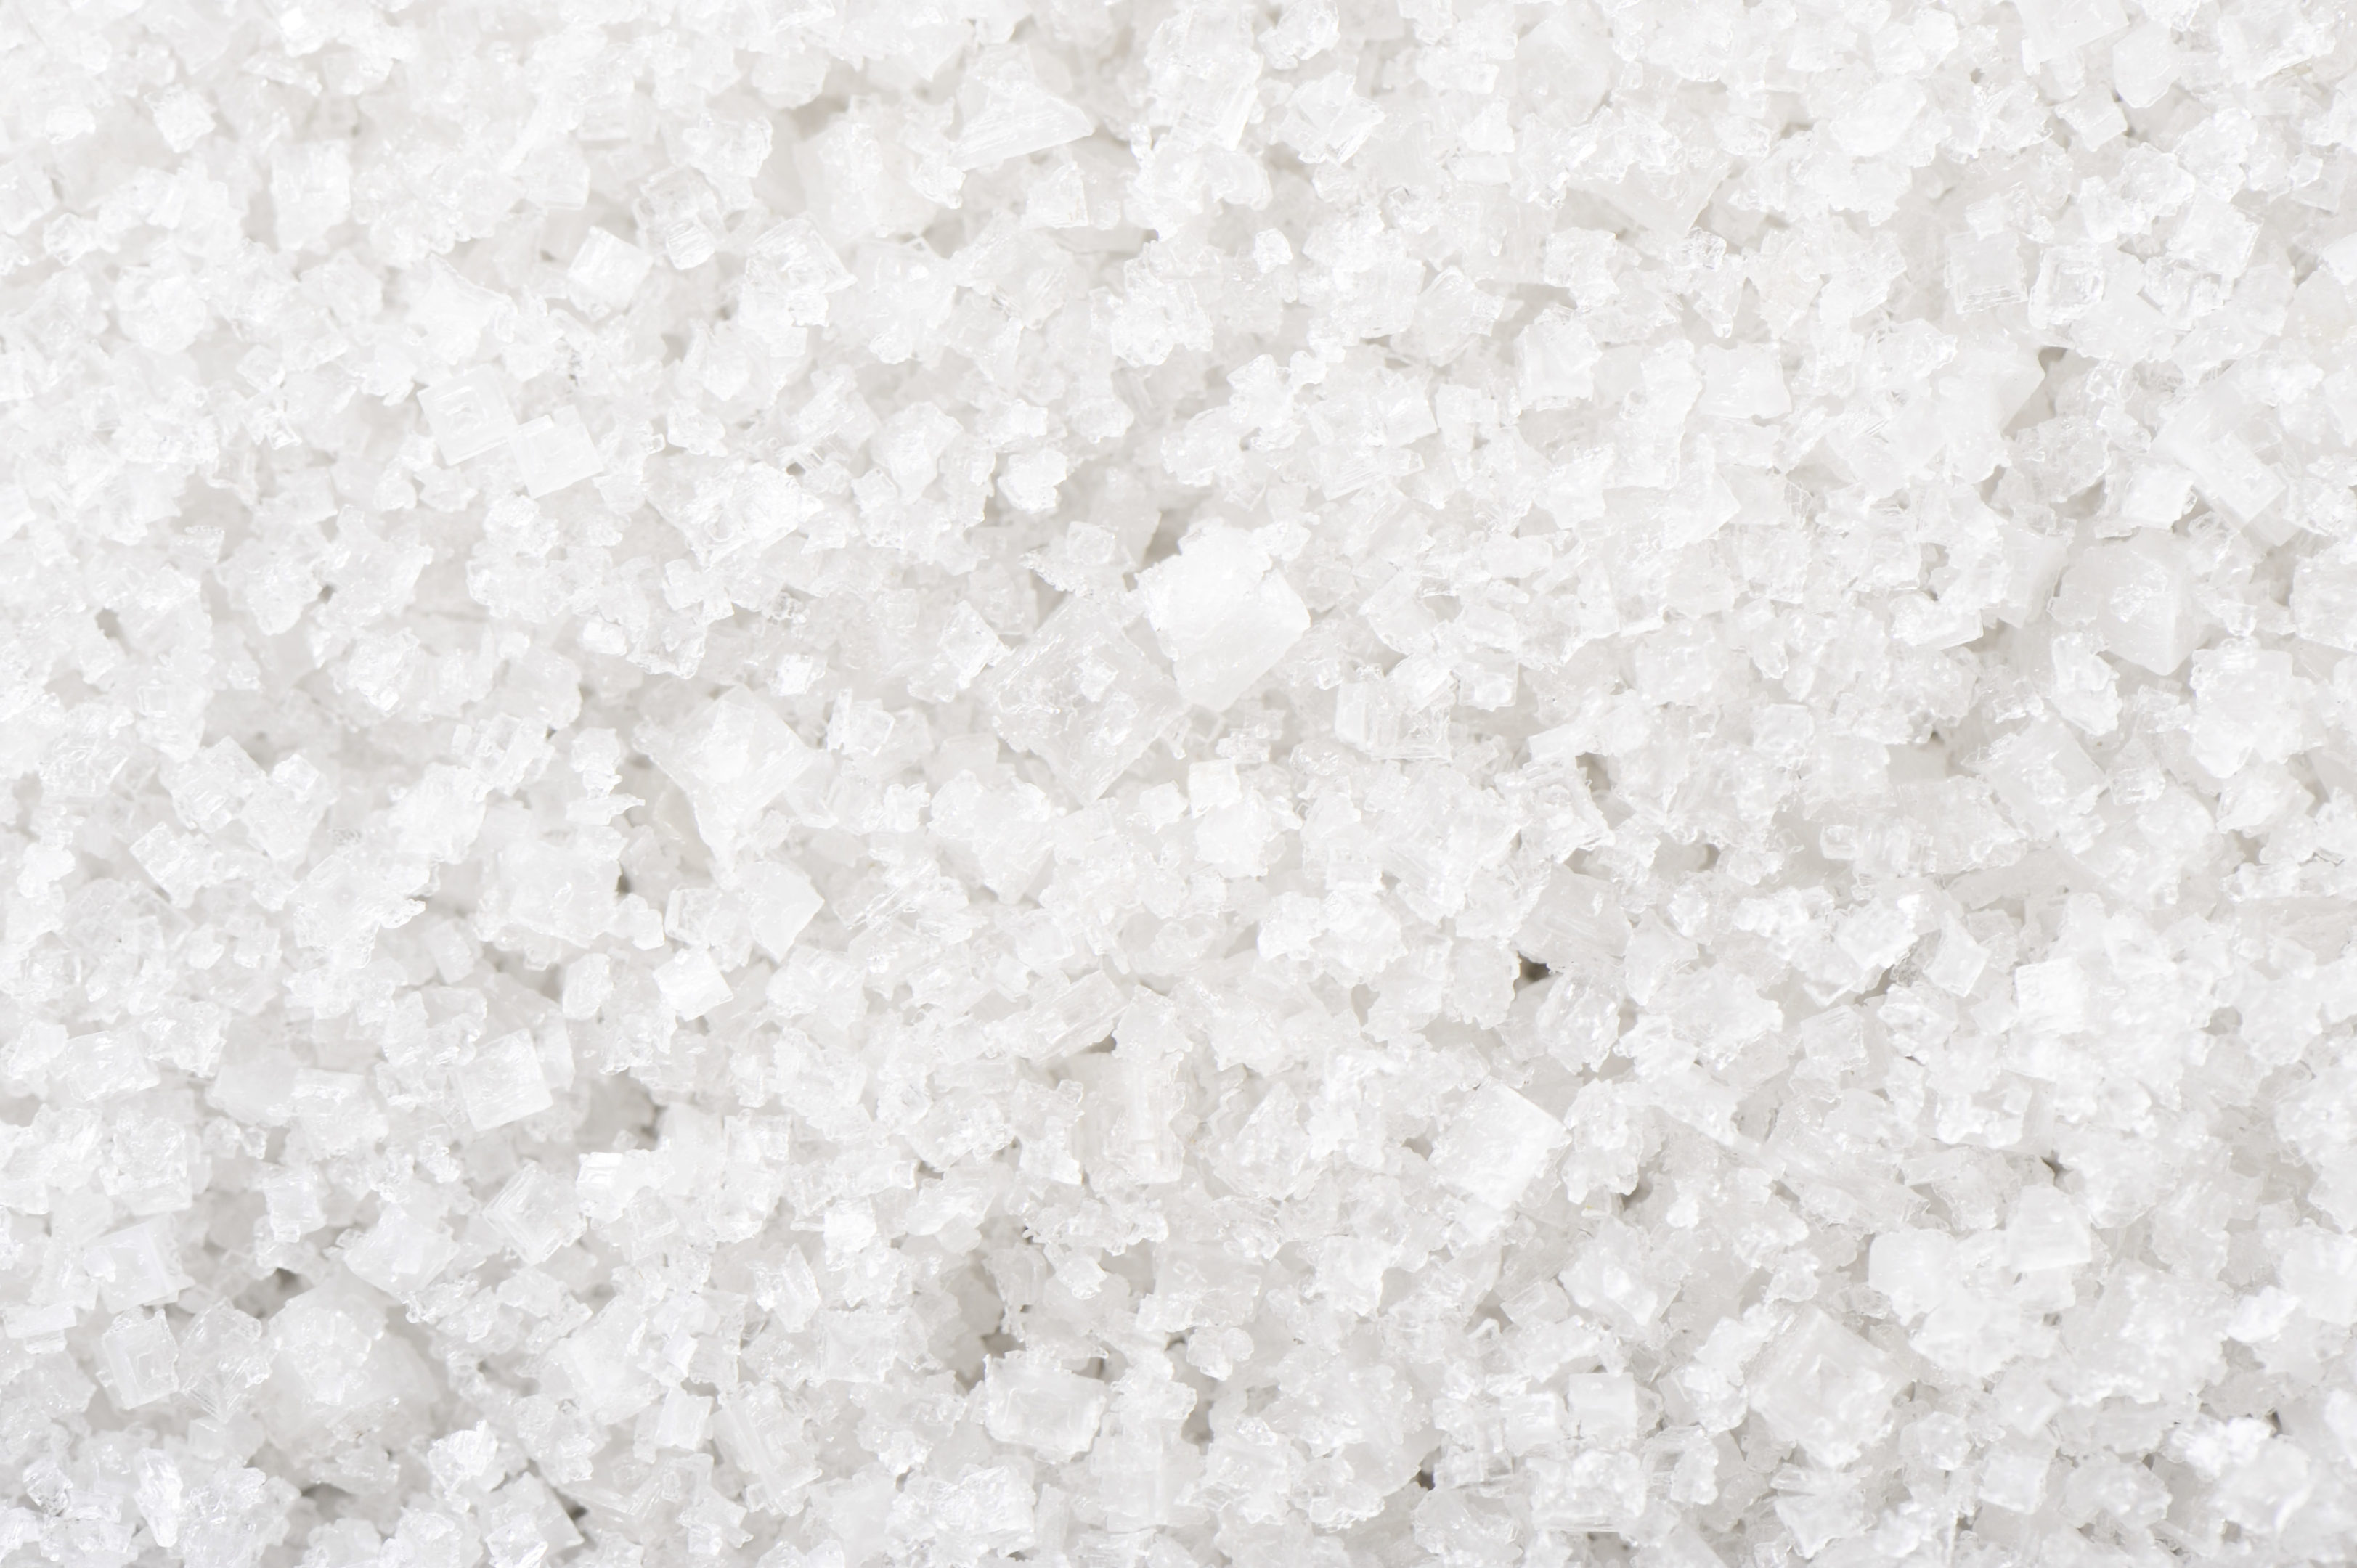 Sea salt background, view from above. More salt...